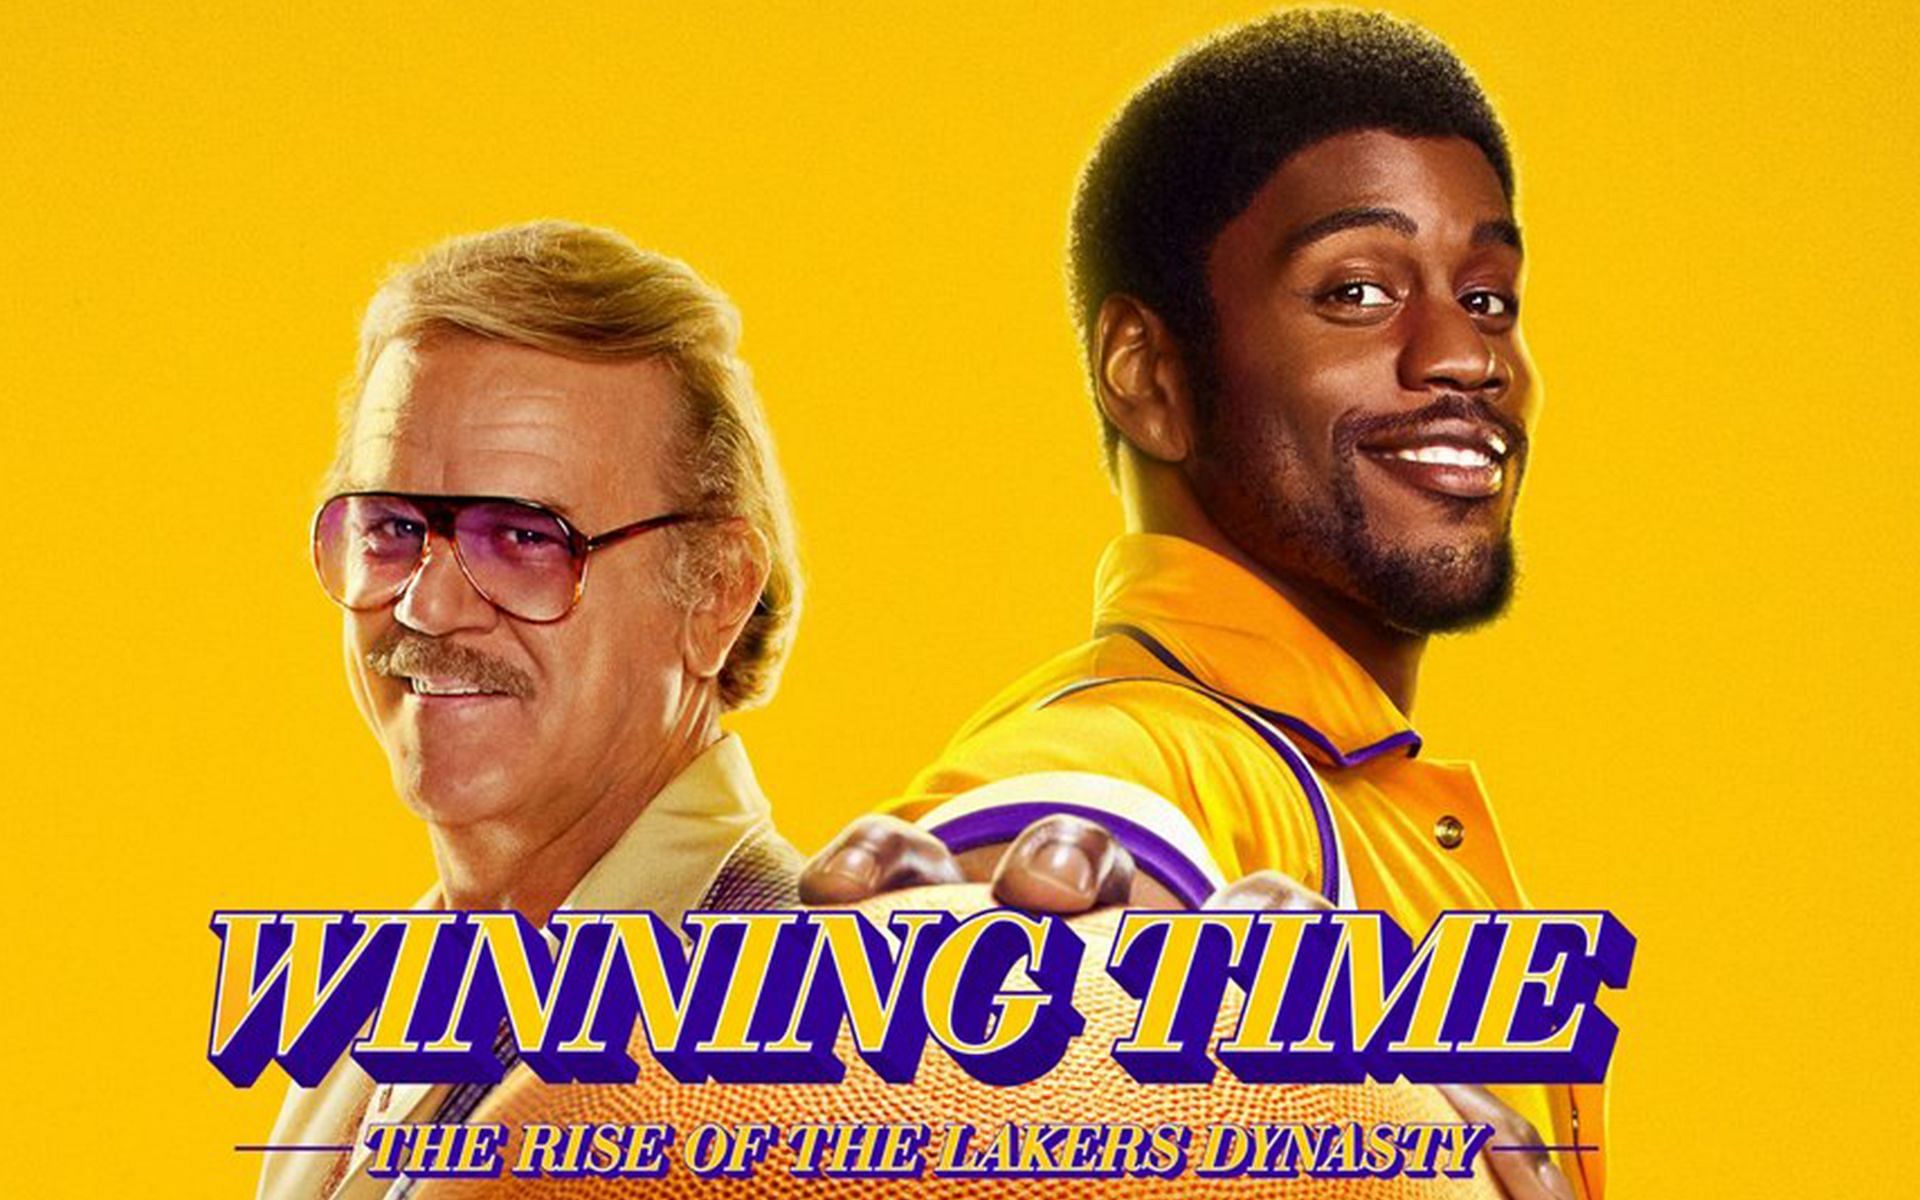 Contrary to 'Winning Time' portrayal, Paul Westhead was an instant success  with Lakers - Silver Screen and Roll